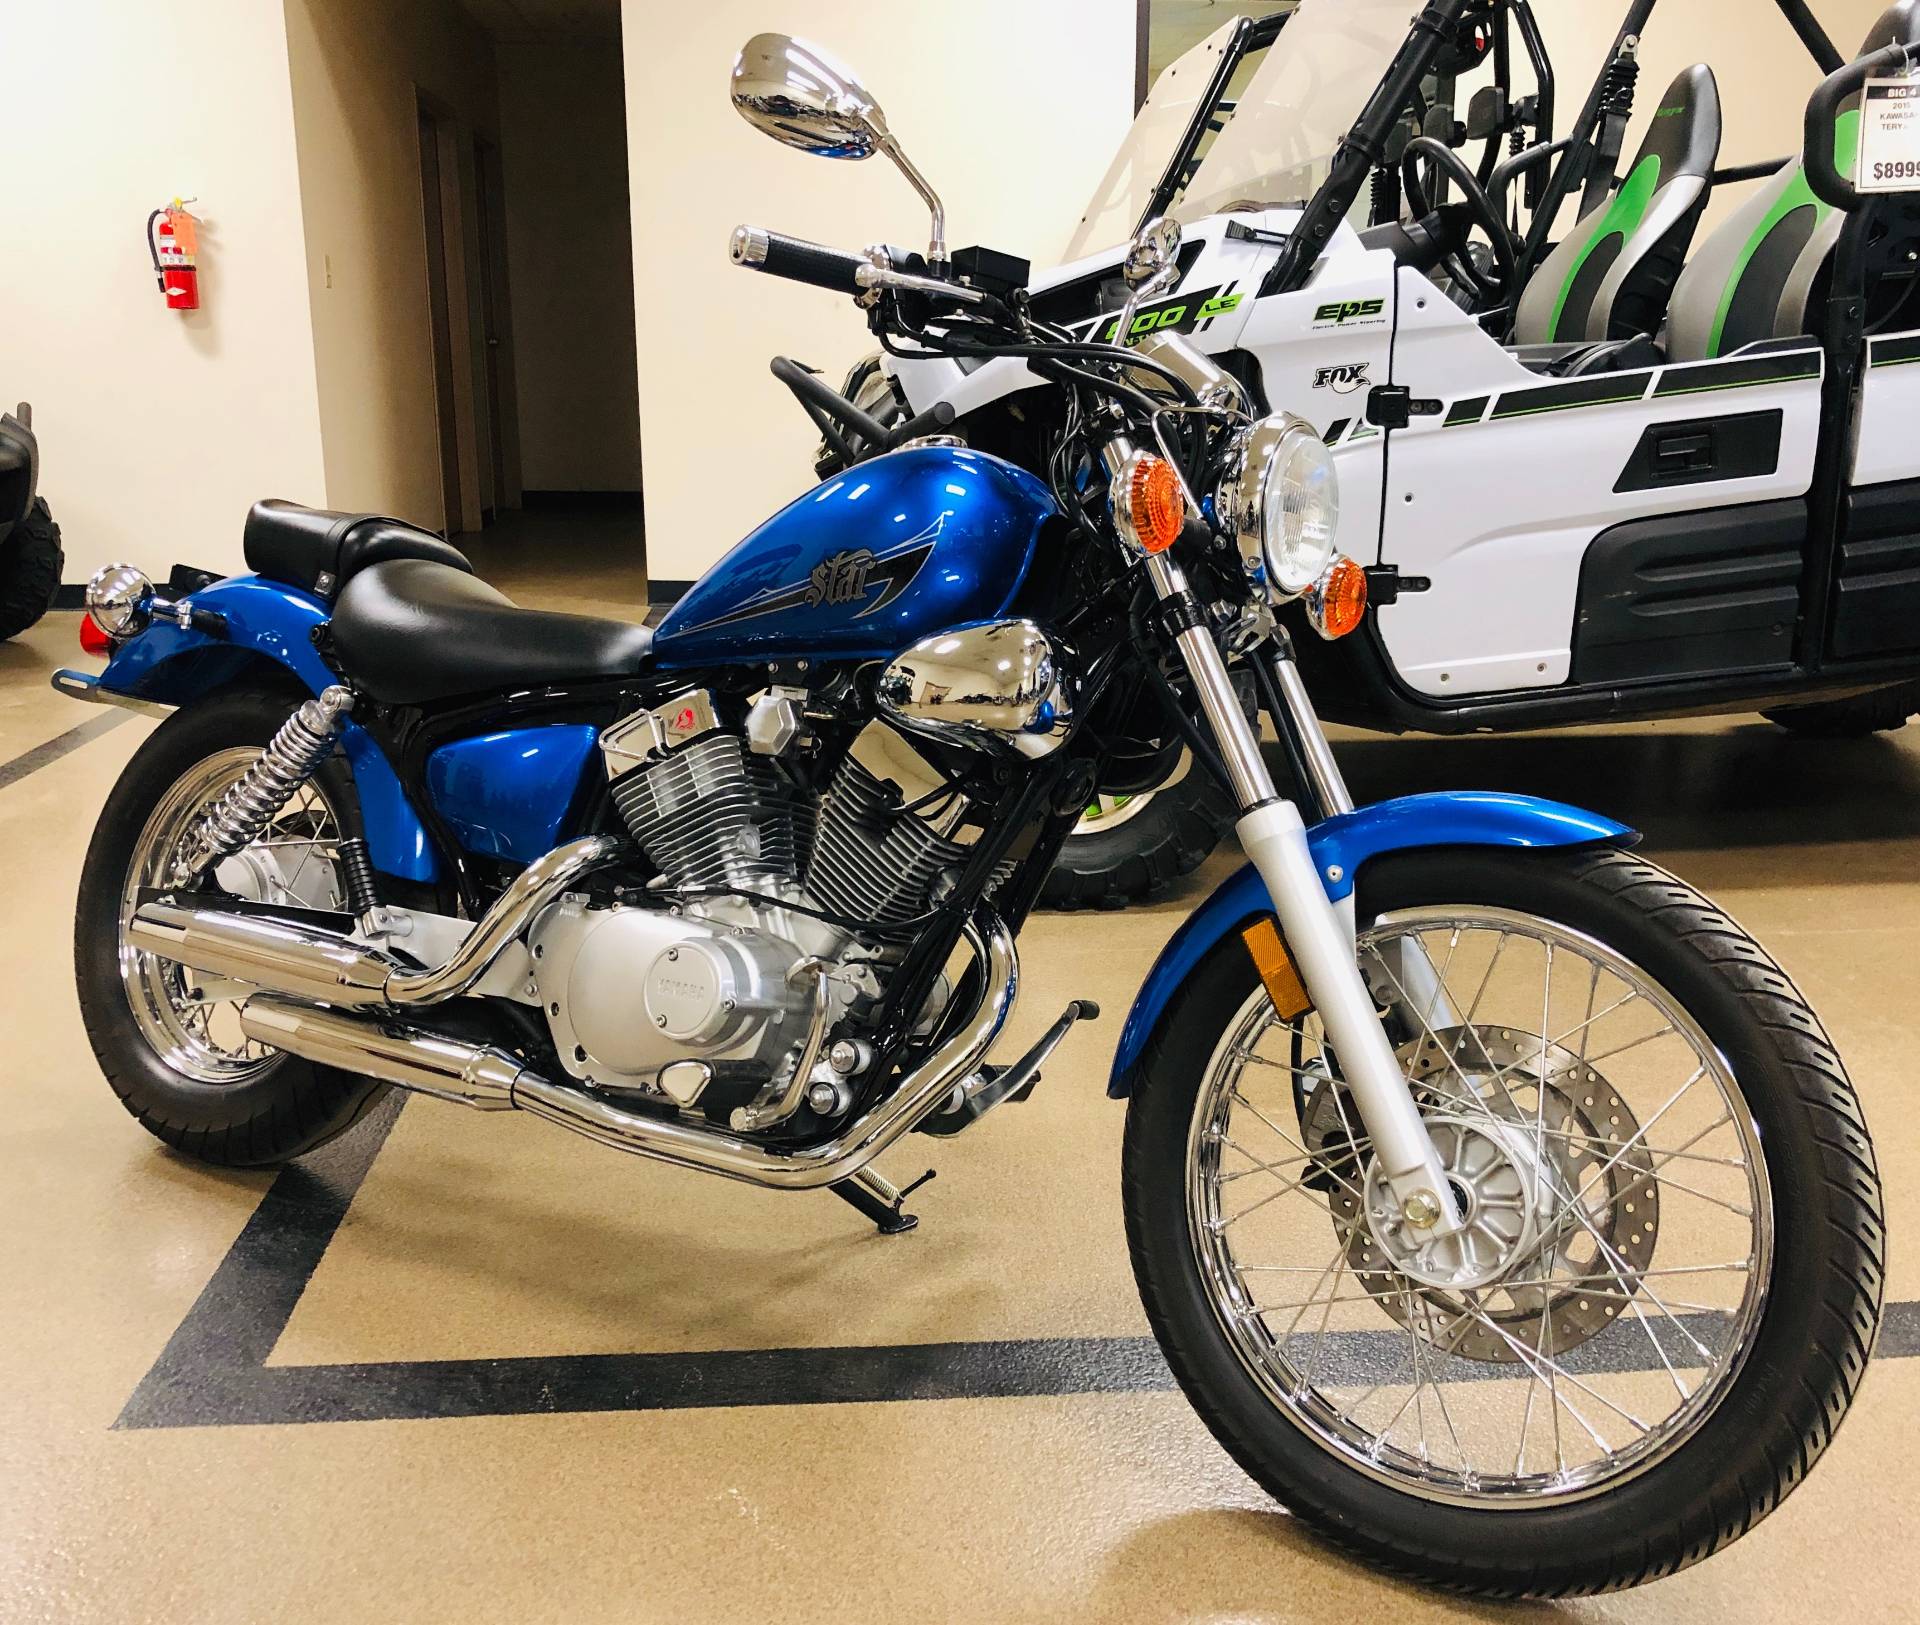 Used 2015 Yamaha V Star 250 Motorcycles in Marietta, OH | Stock Number: N/A